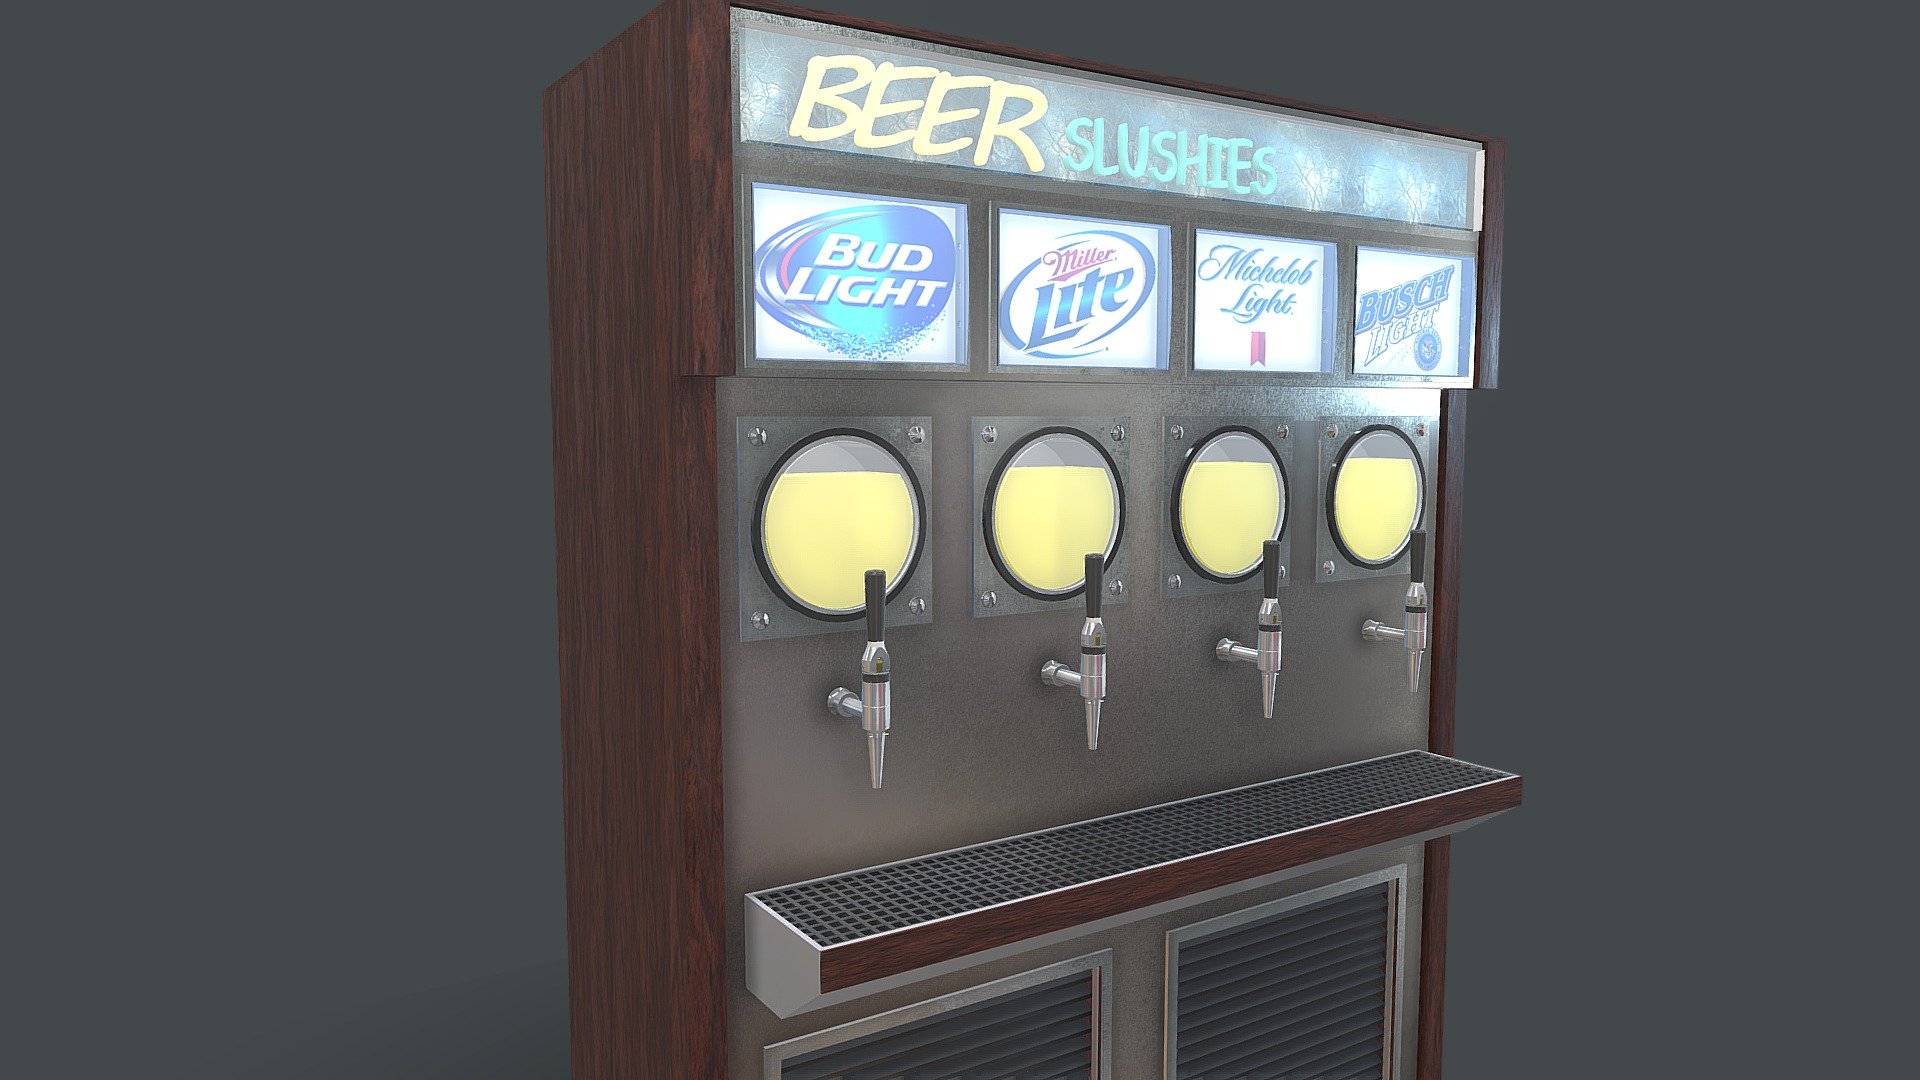 Beer Slushy Dispenser Machine.  This is something I made up for fun. Hope you can find a use for it.

This model is free. If you'd like to make a donation below, that would be great!

 - Beer Slushy Beverage Dispenser Machine - Download Free 3D model by jimbogies 3d model